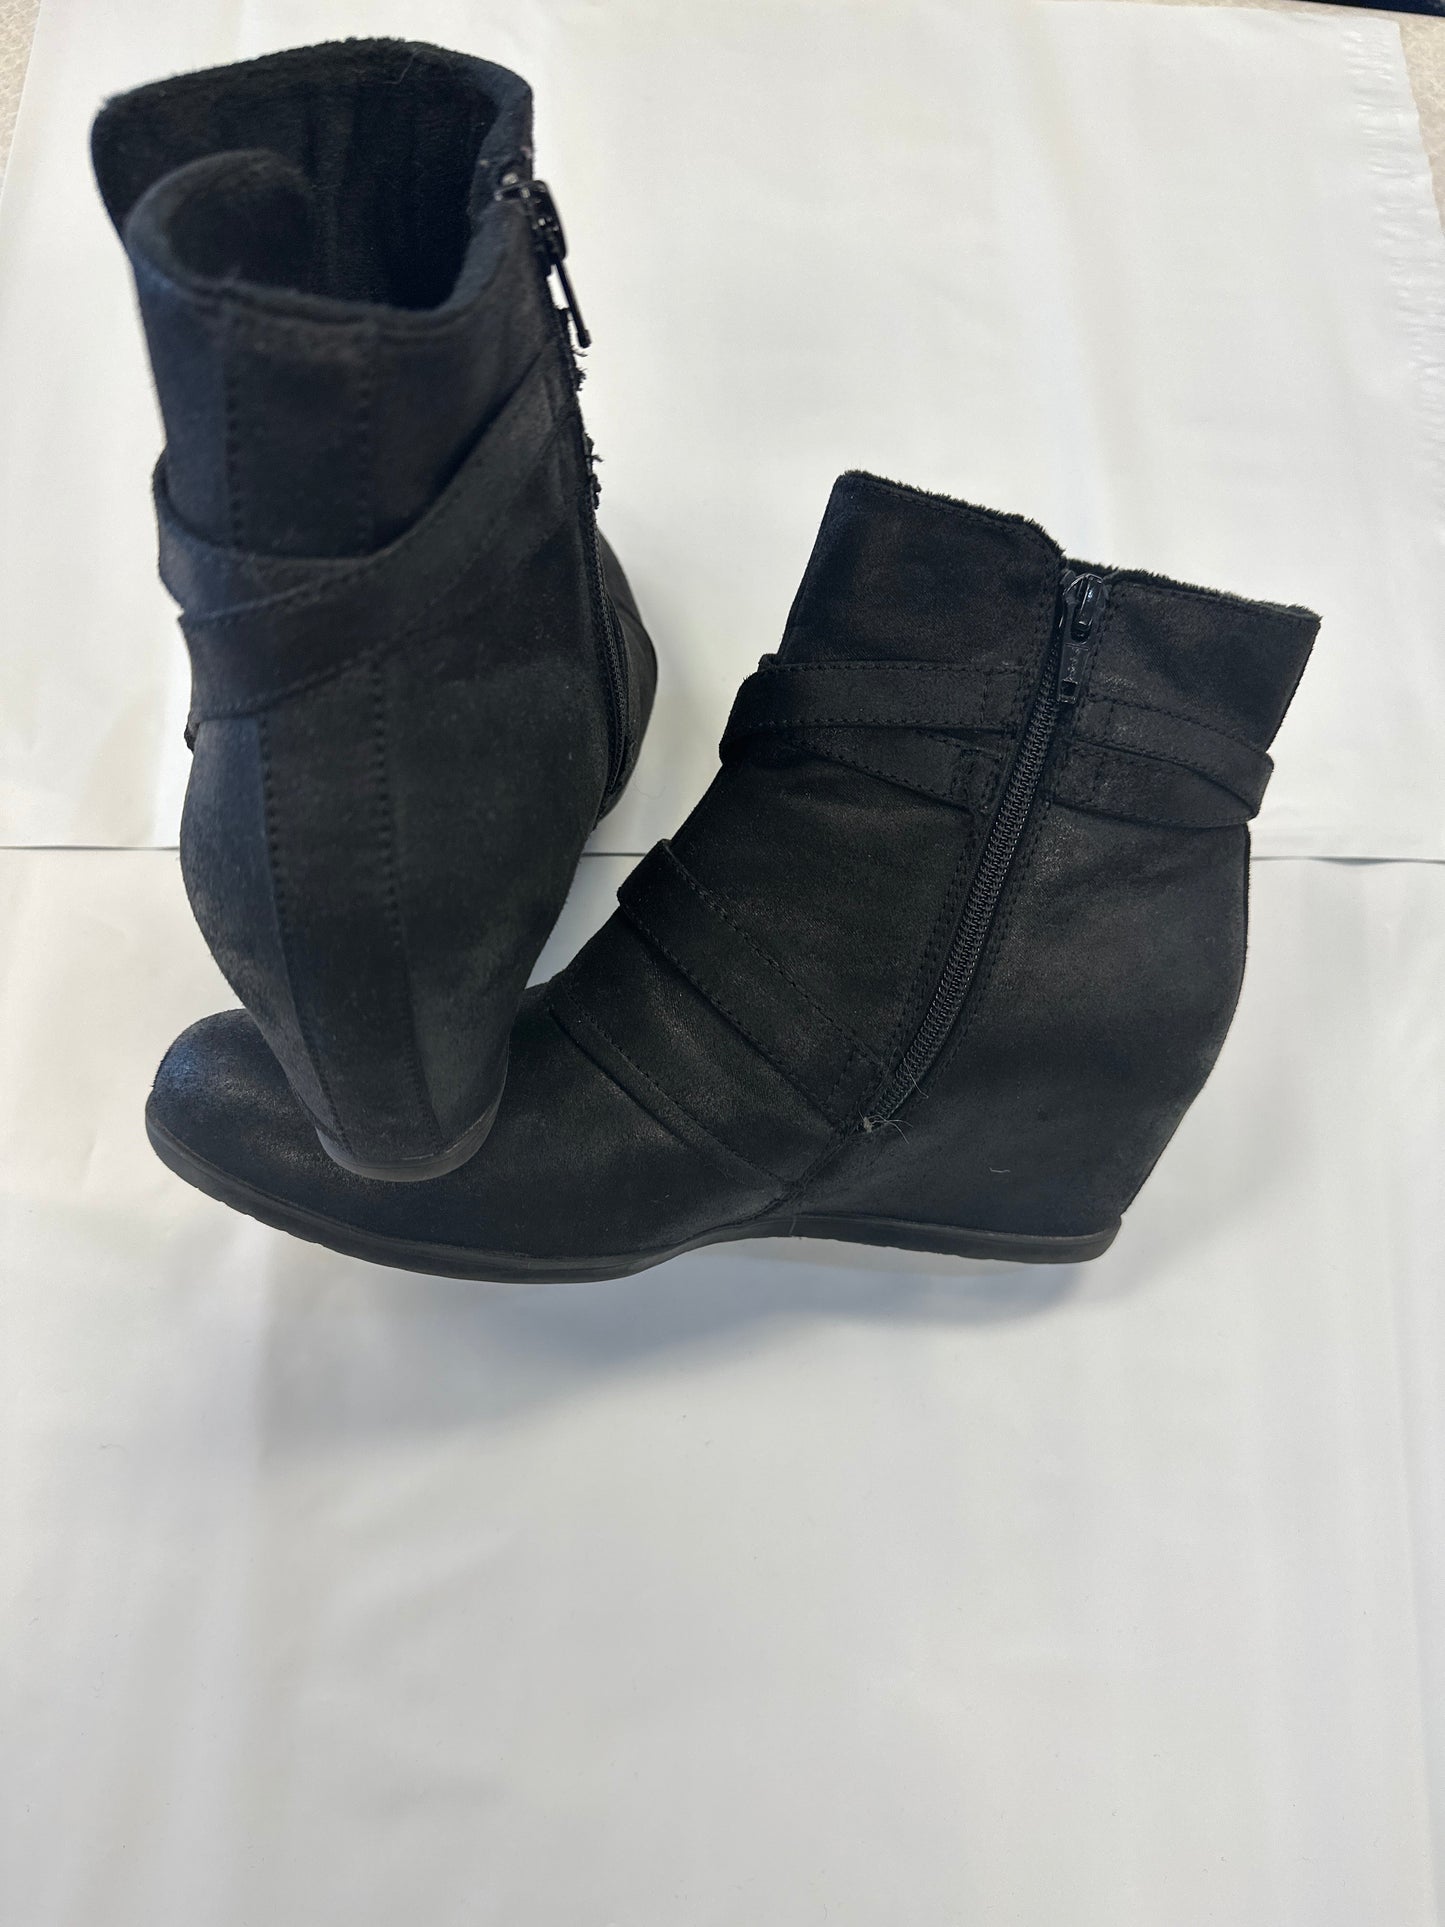 Boots Ankle Heels By Bare Traps  Size: 9.5